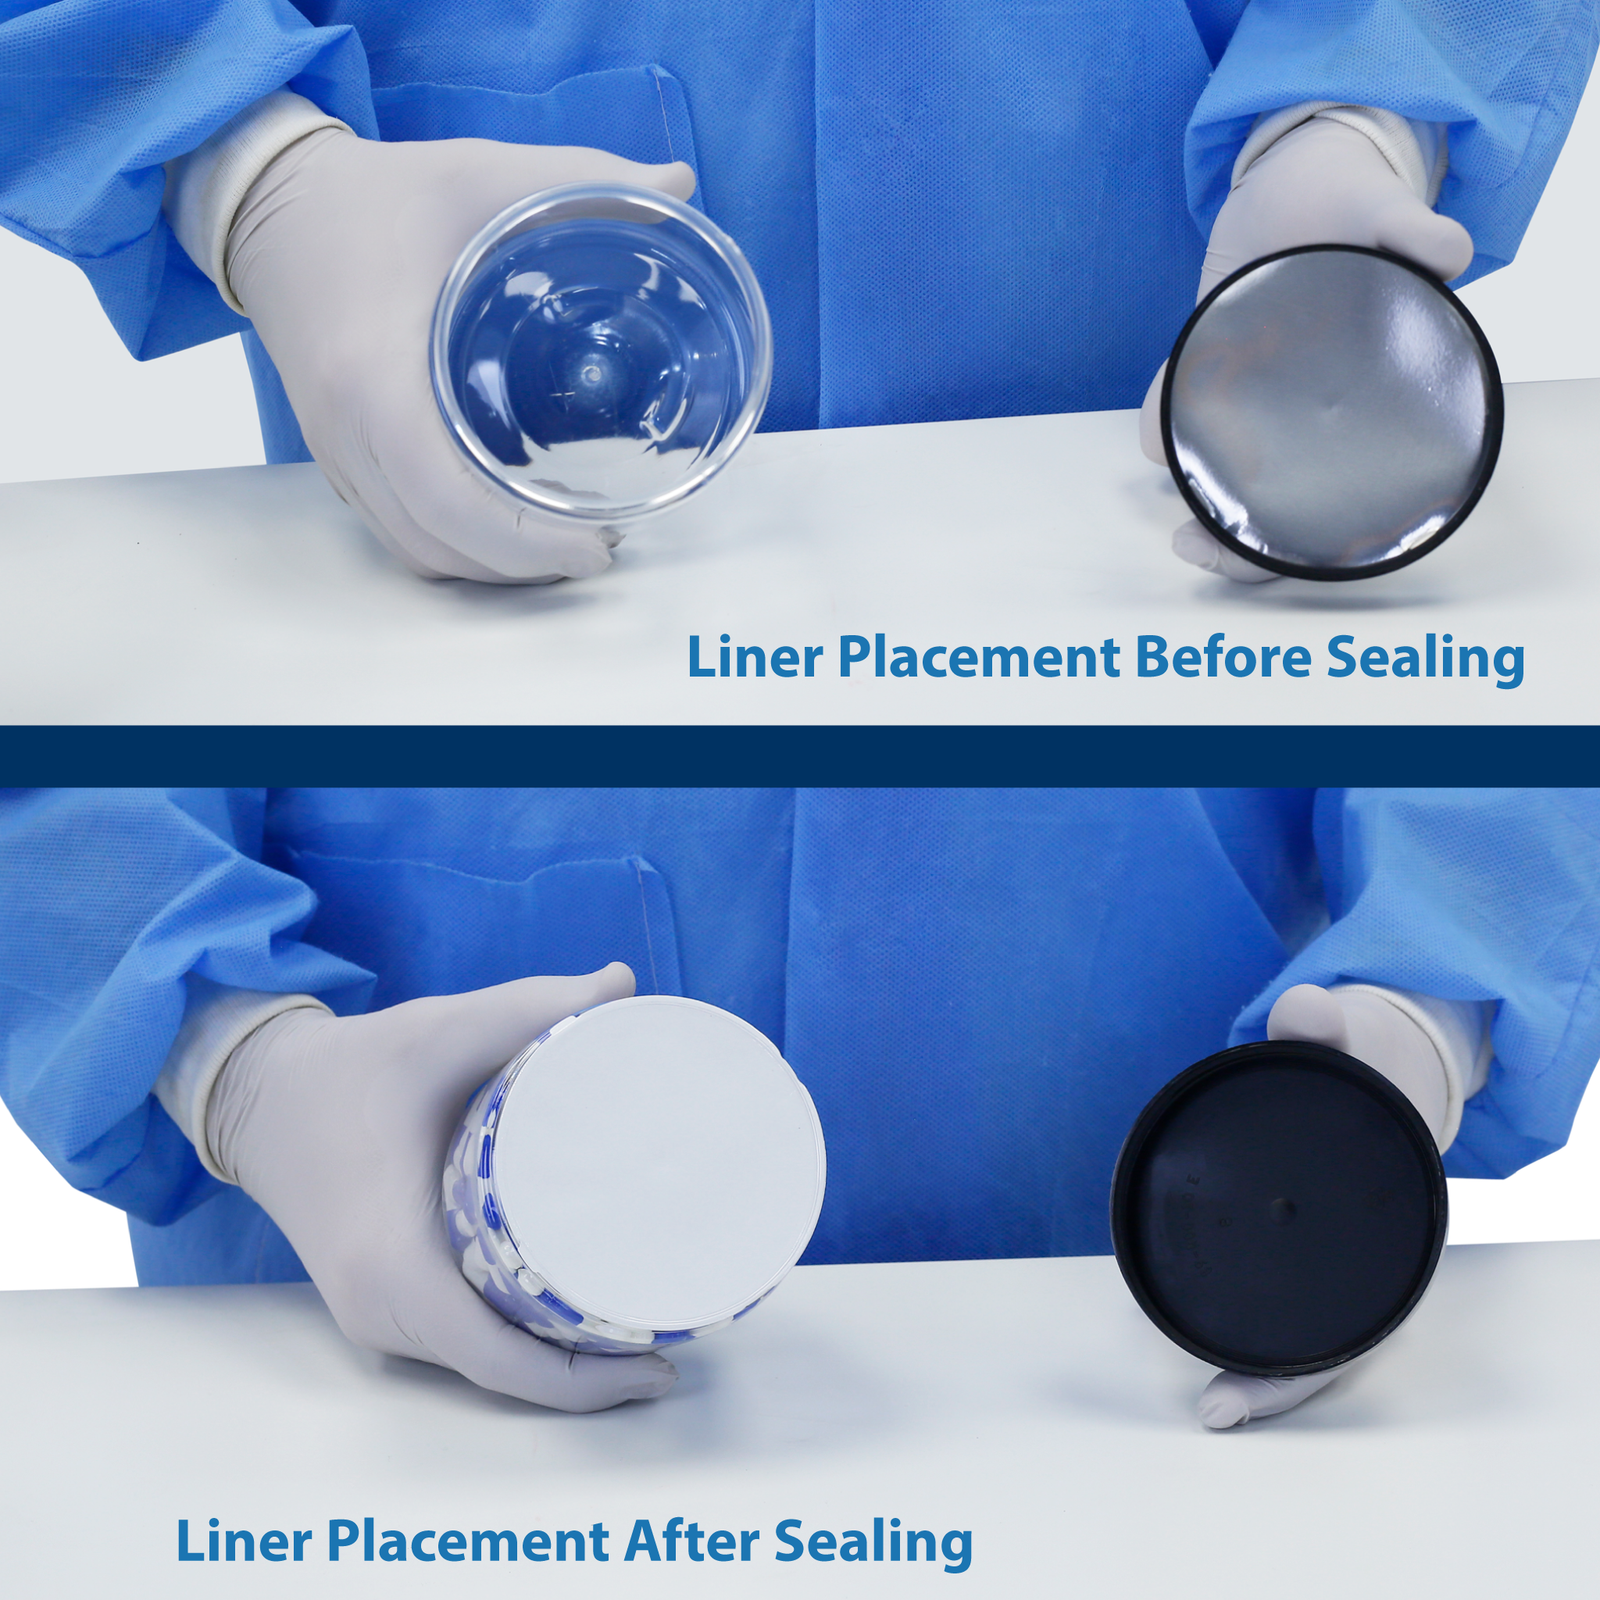 Placement of the induction liner before it has been sealed and the liner attached to the container after it has been sealed